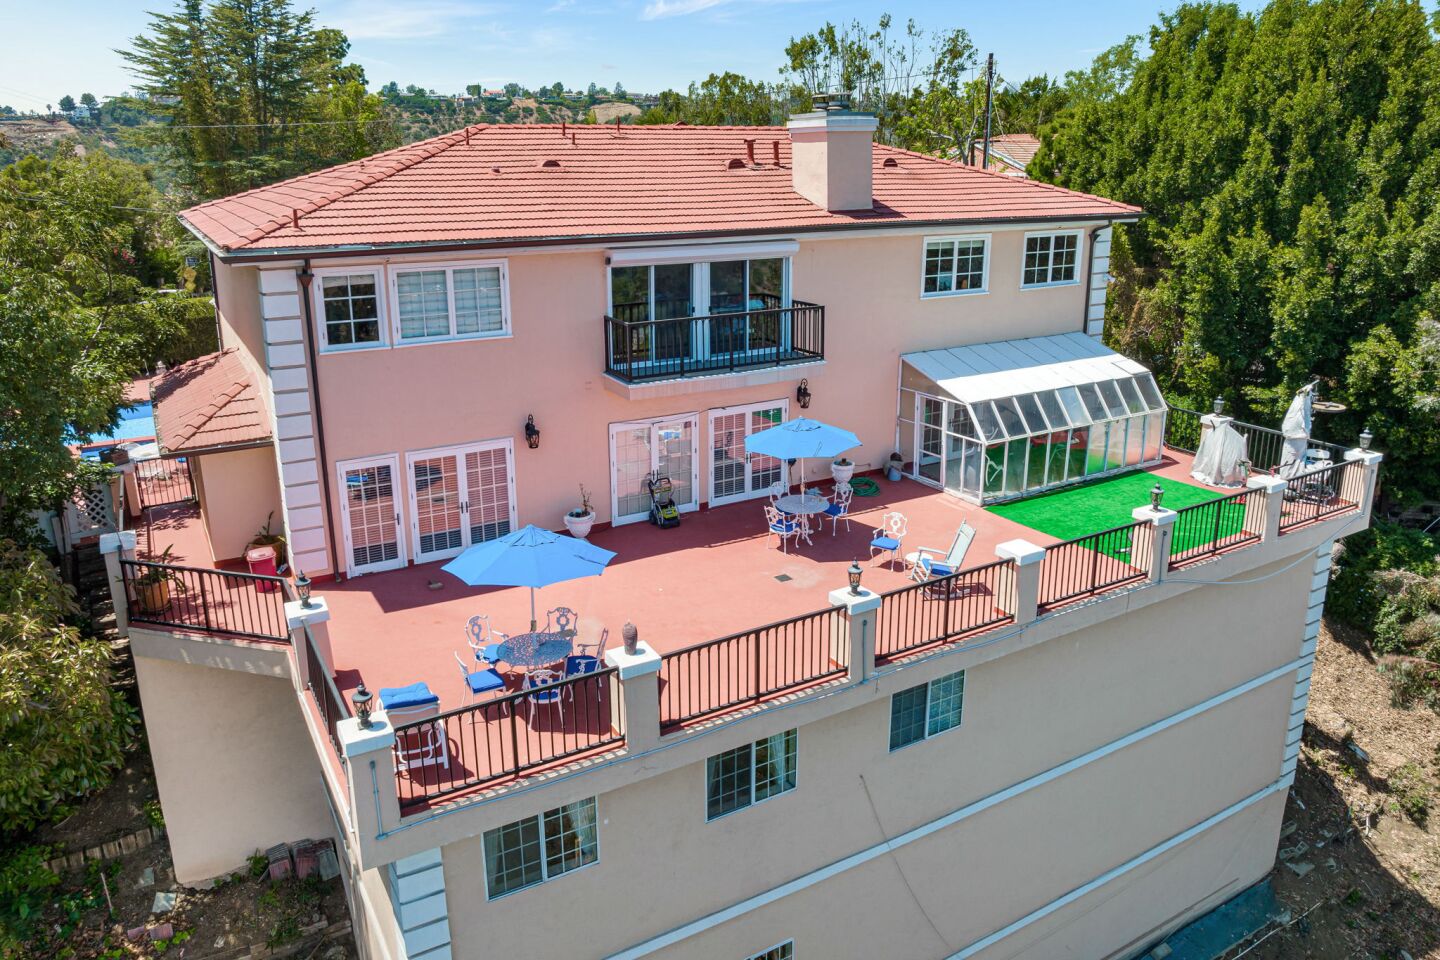 The four-story home has a deck in the back on an upper floor that is furnished.